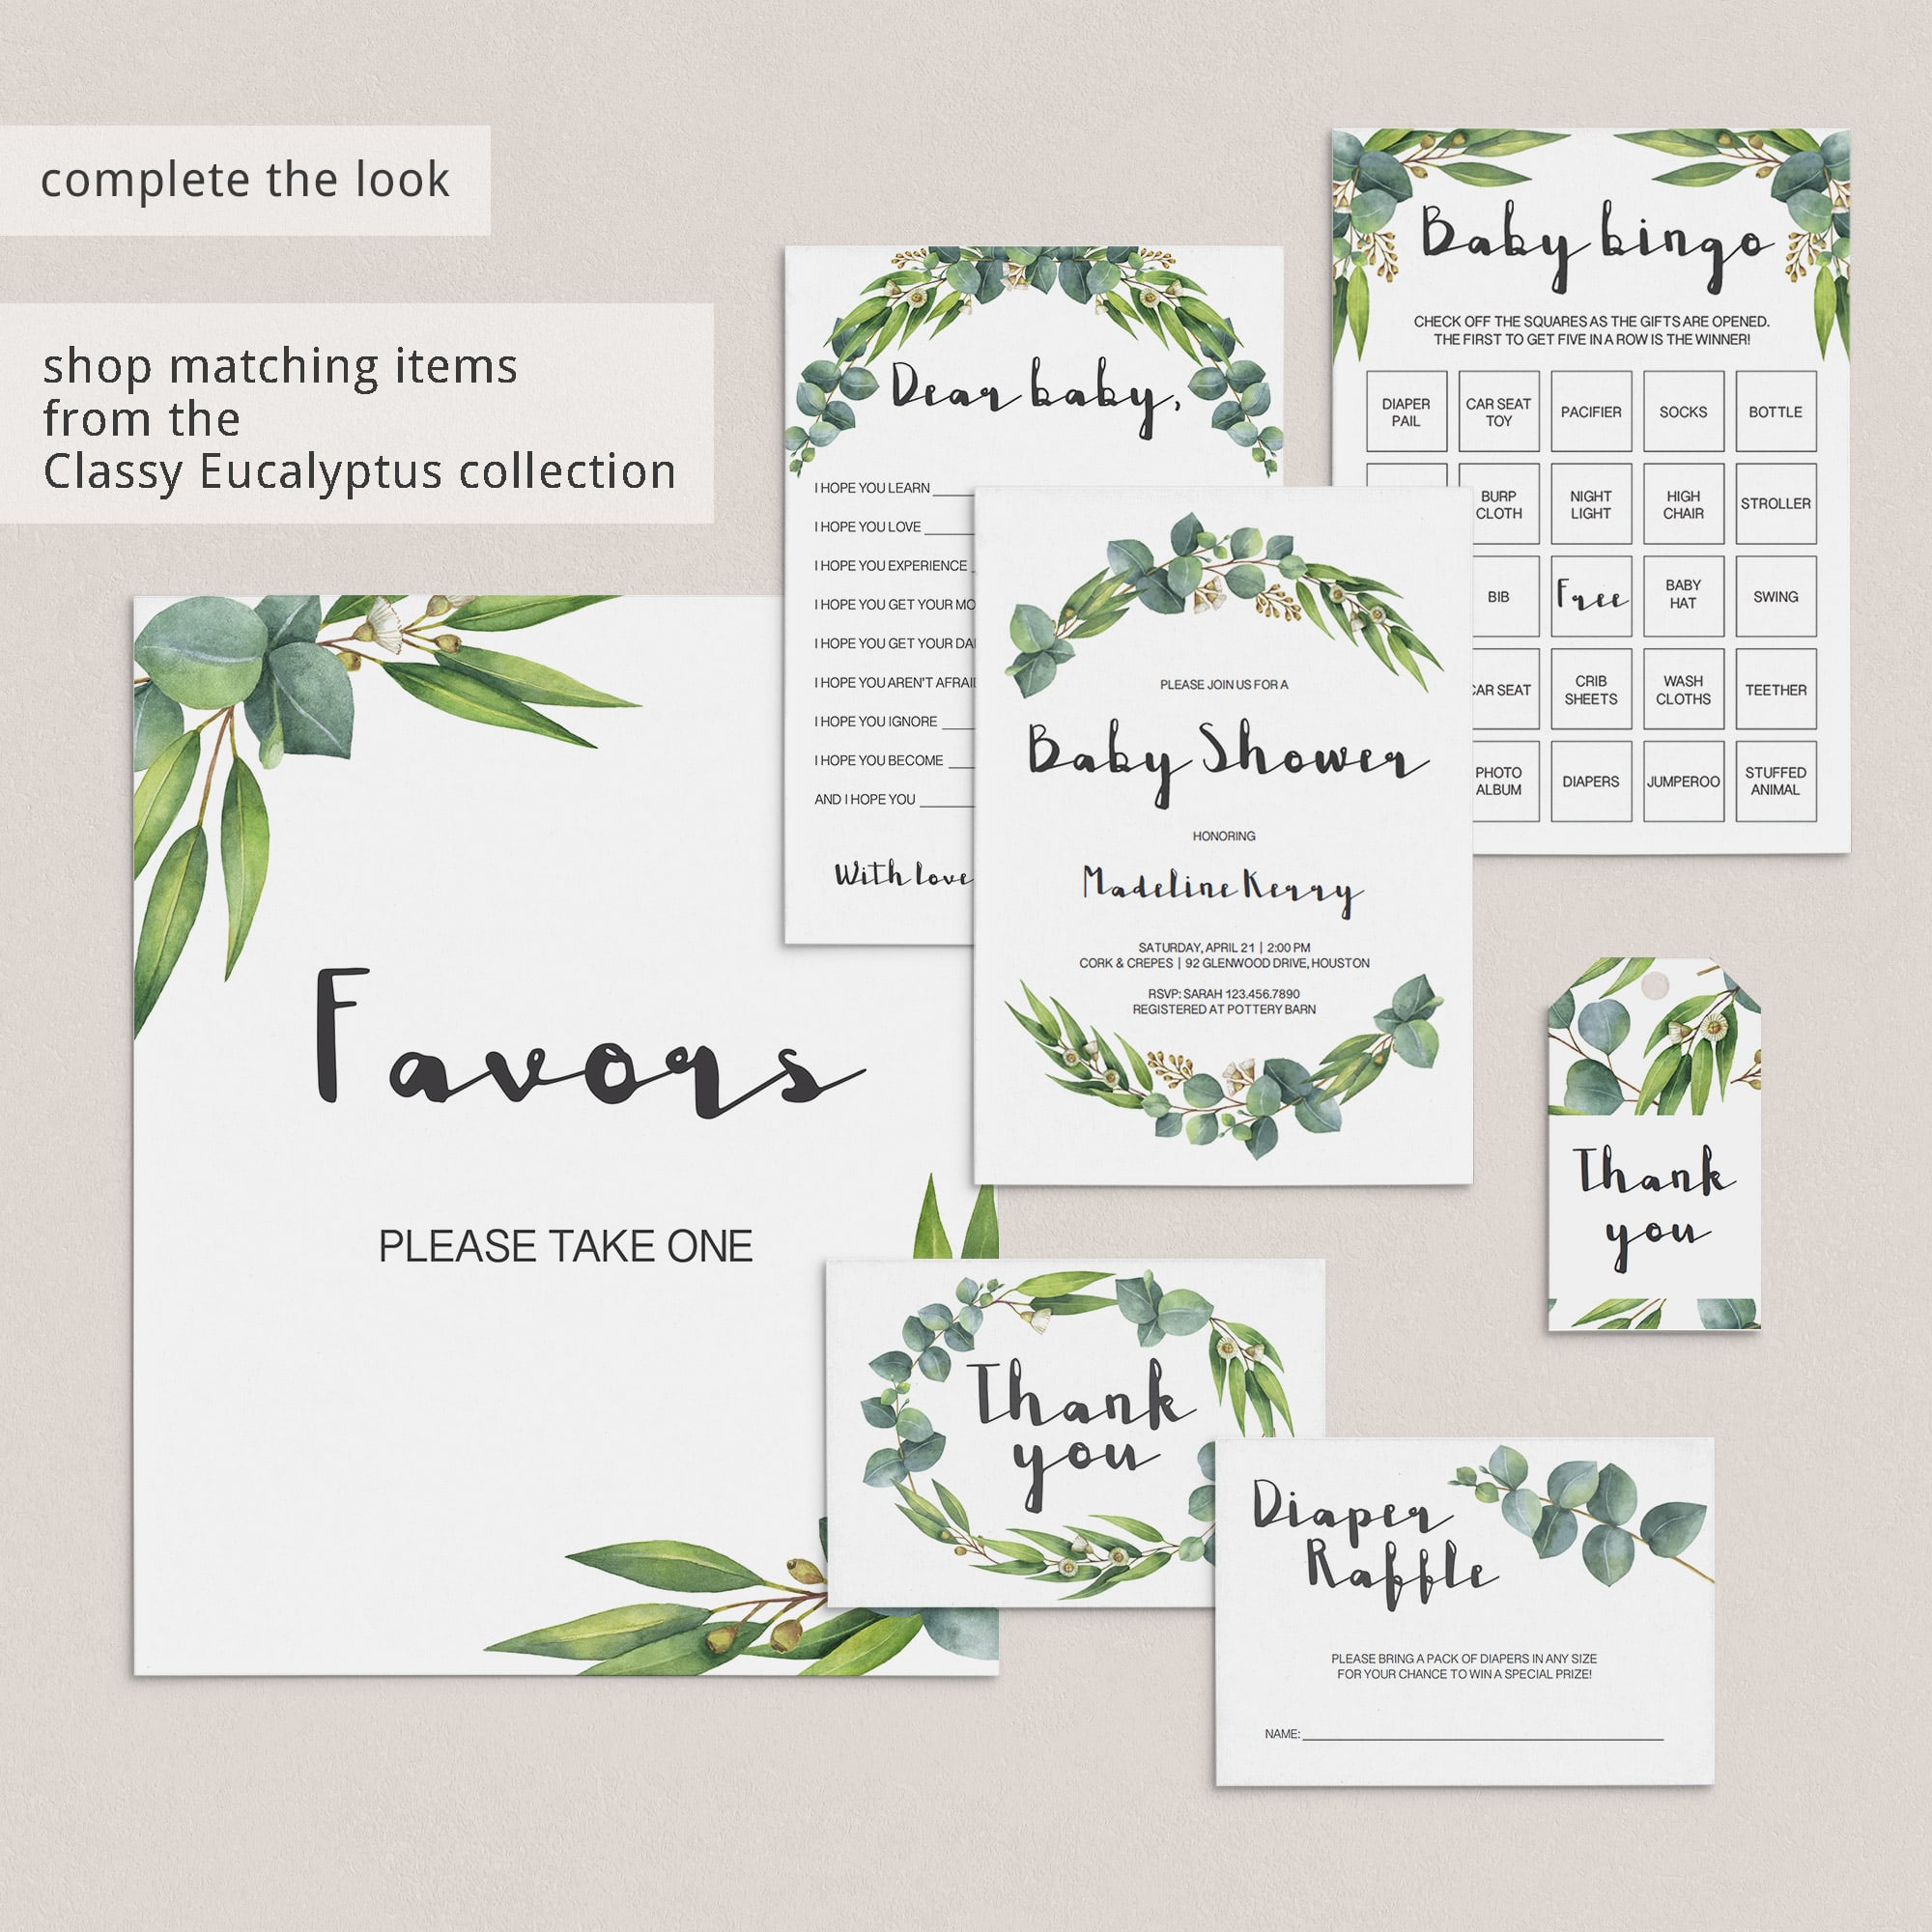 Greenery themed baby shower ideas by LittleSizzle